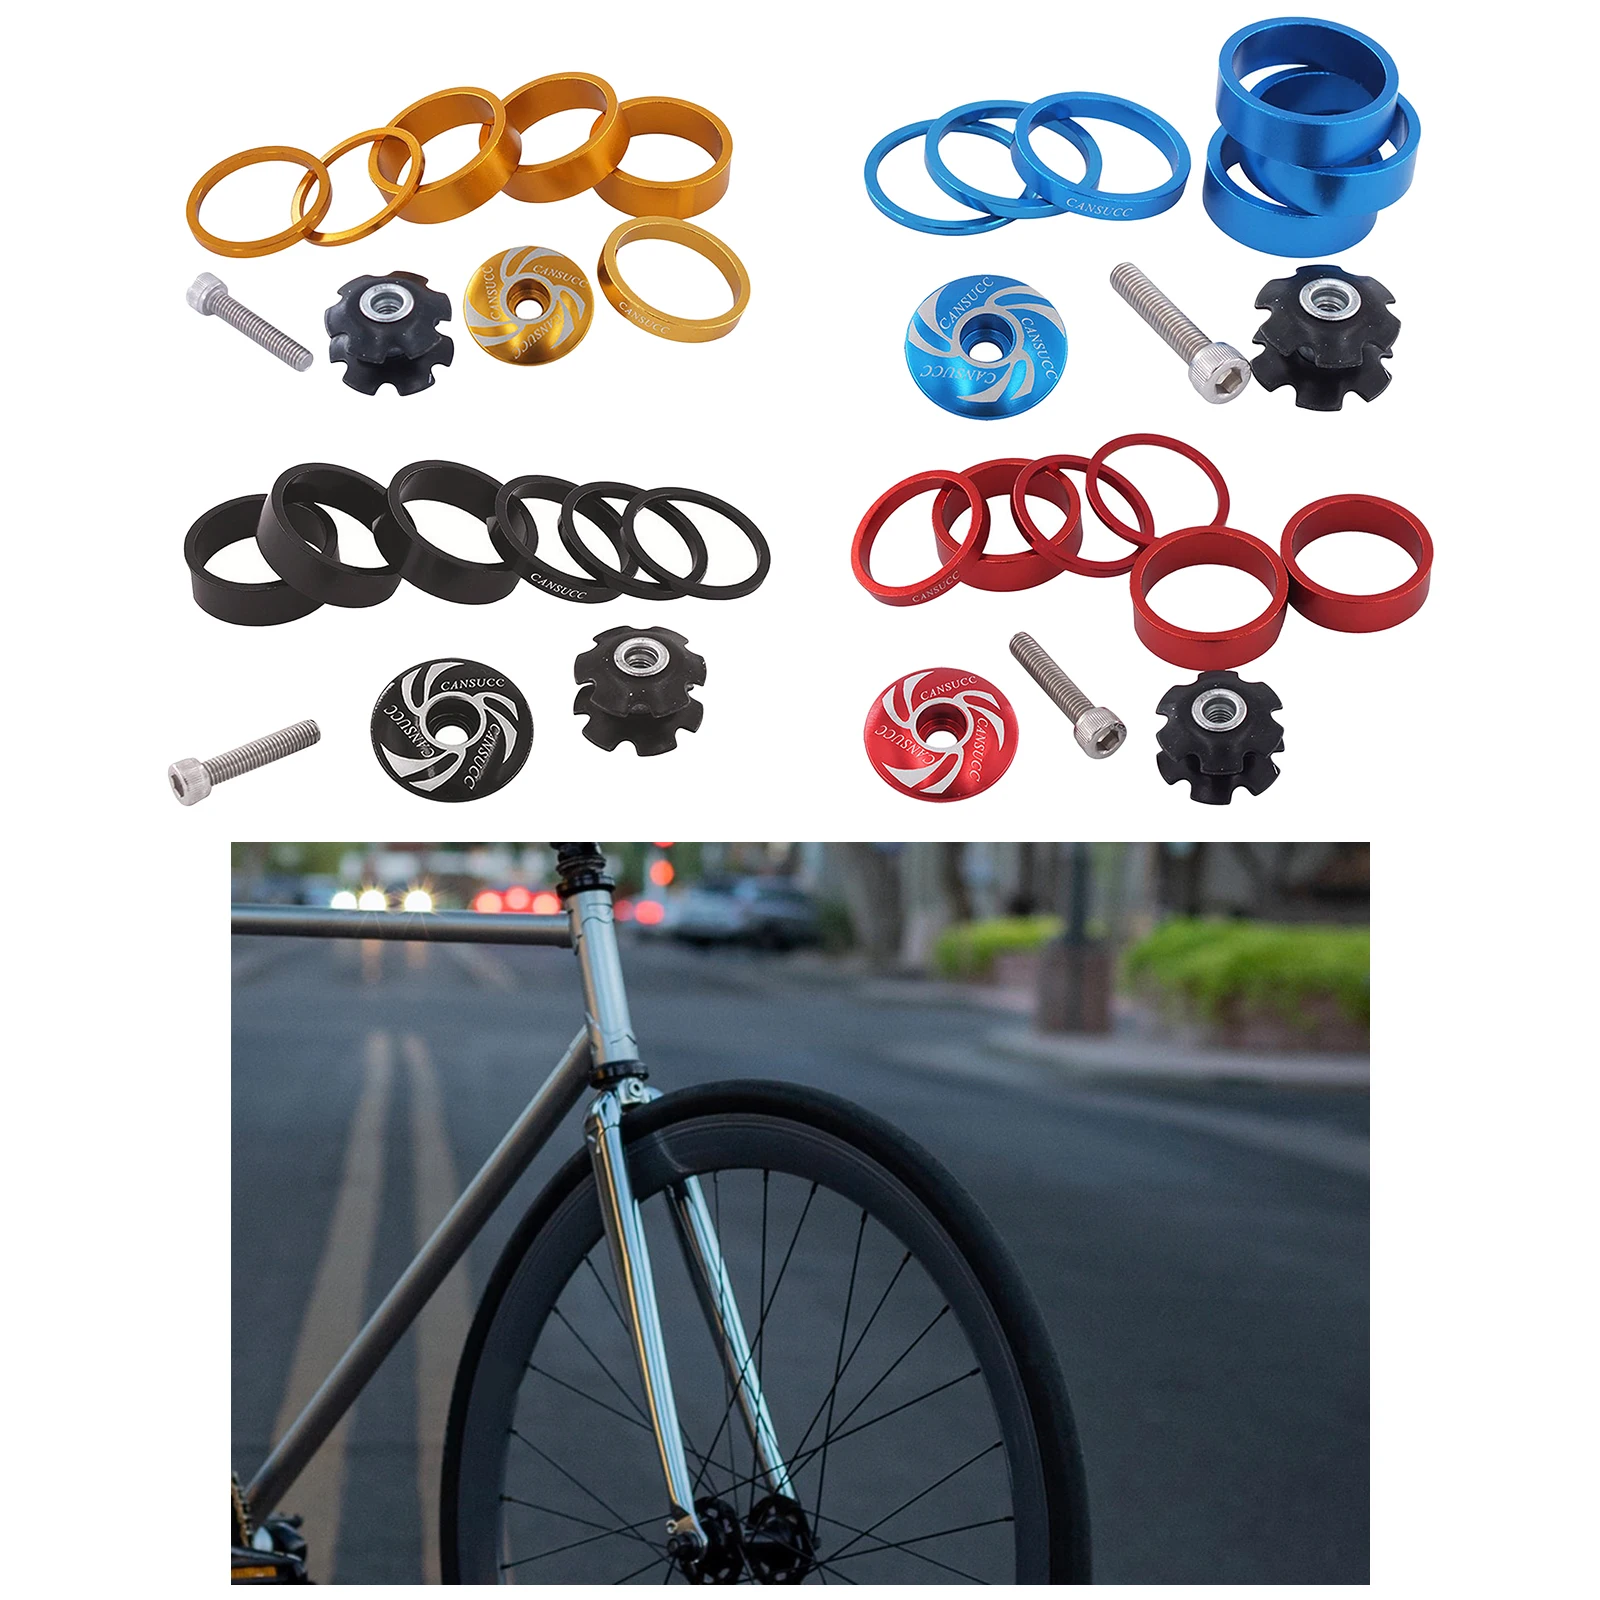 1 1/8 Inch Headset Spacer with Stem Top Cap,Headset Star Nut Set